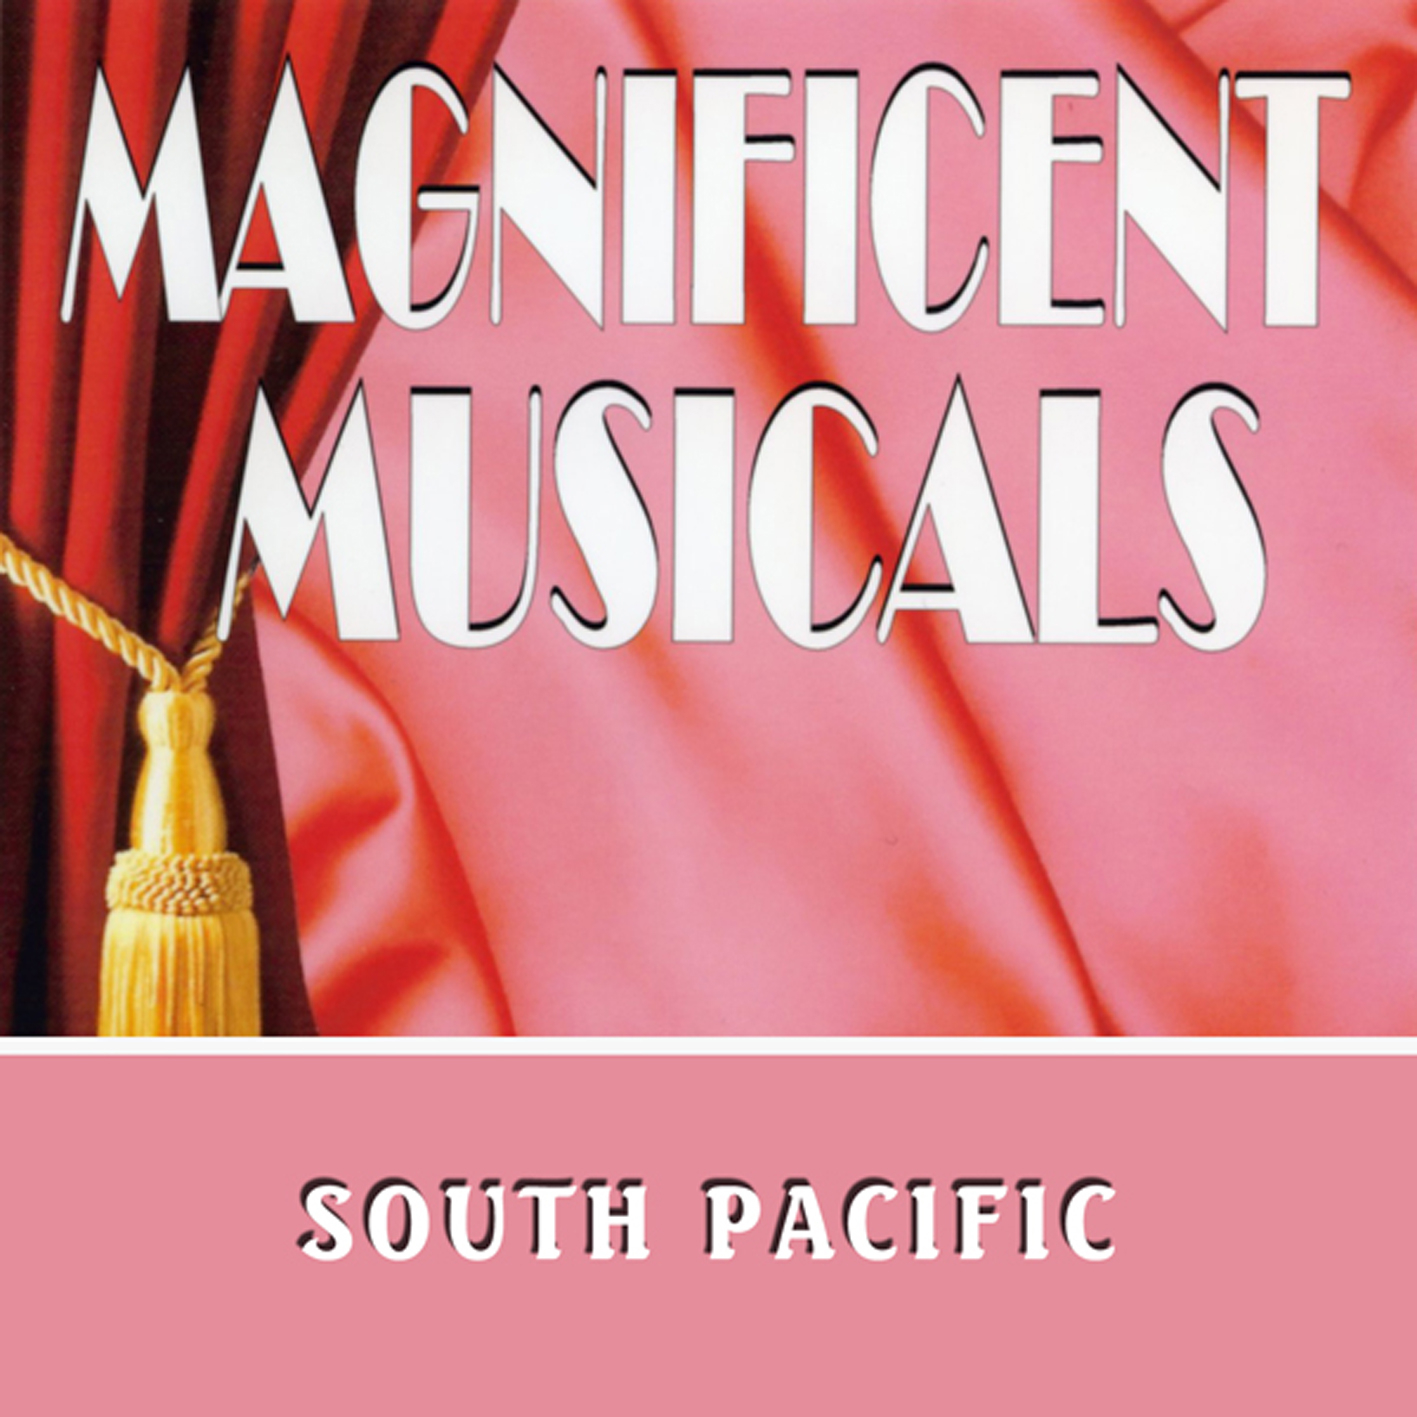 The Magnificent Musicals: South Pacific